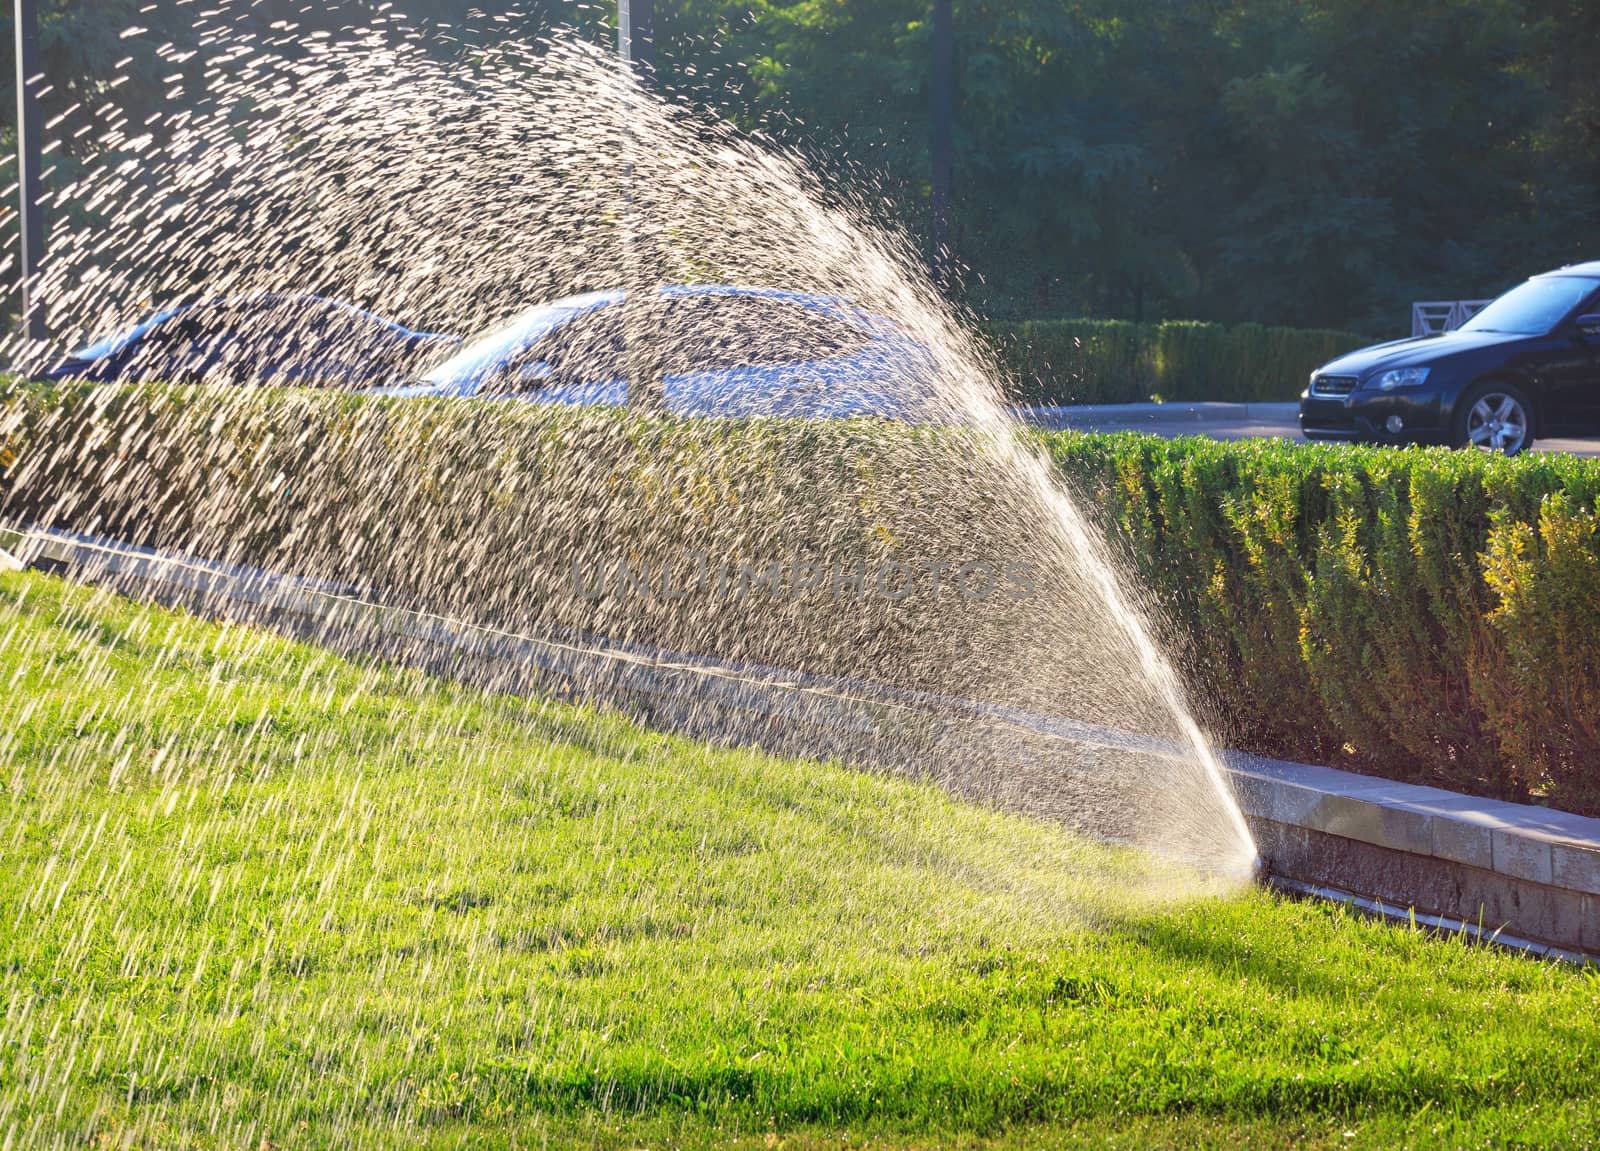 A beautiful spray fountain from an automatic sprinkler irrigates the lawn against a backdrop of clipped bushes in a city parking lot on a bright sunny day, copy space.